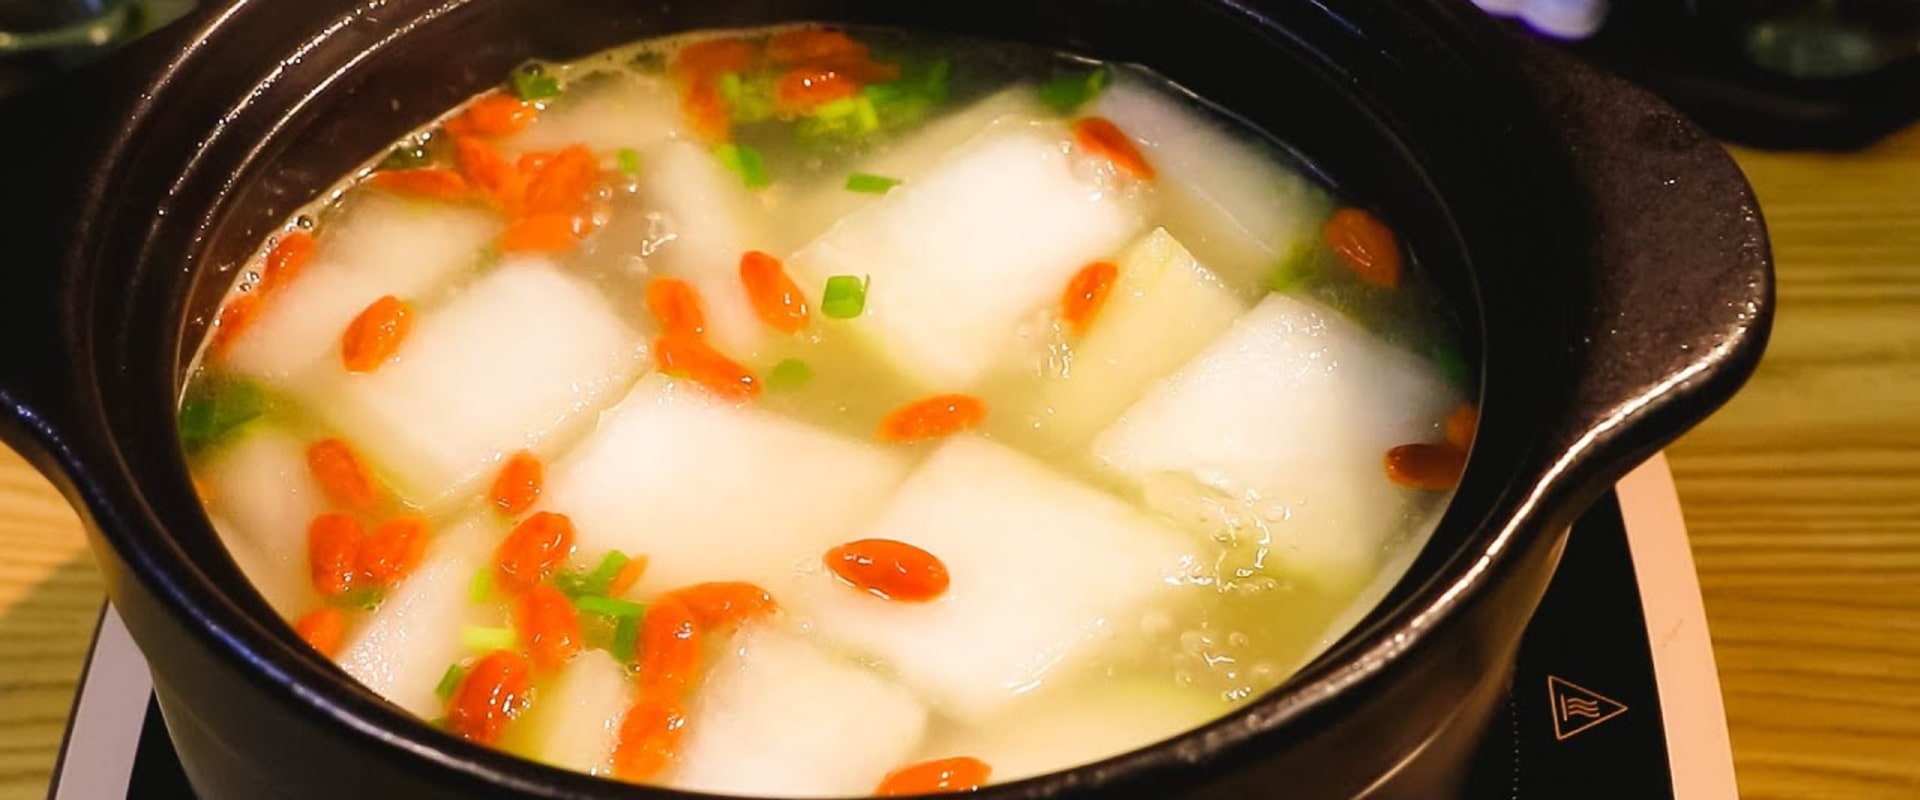 Dried Scallop and Winter Melon Soup: A Delicious and Nourishing Chinese Dish